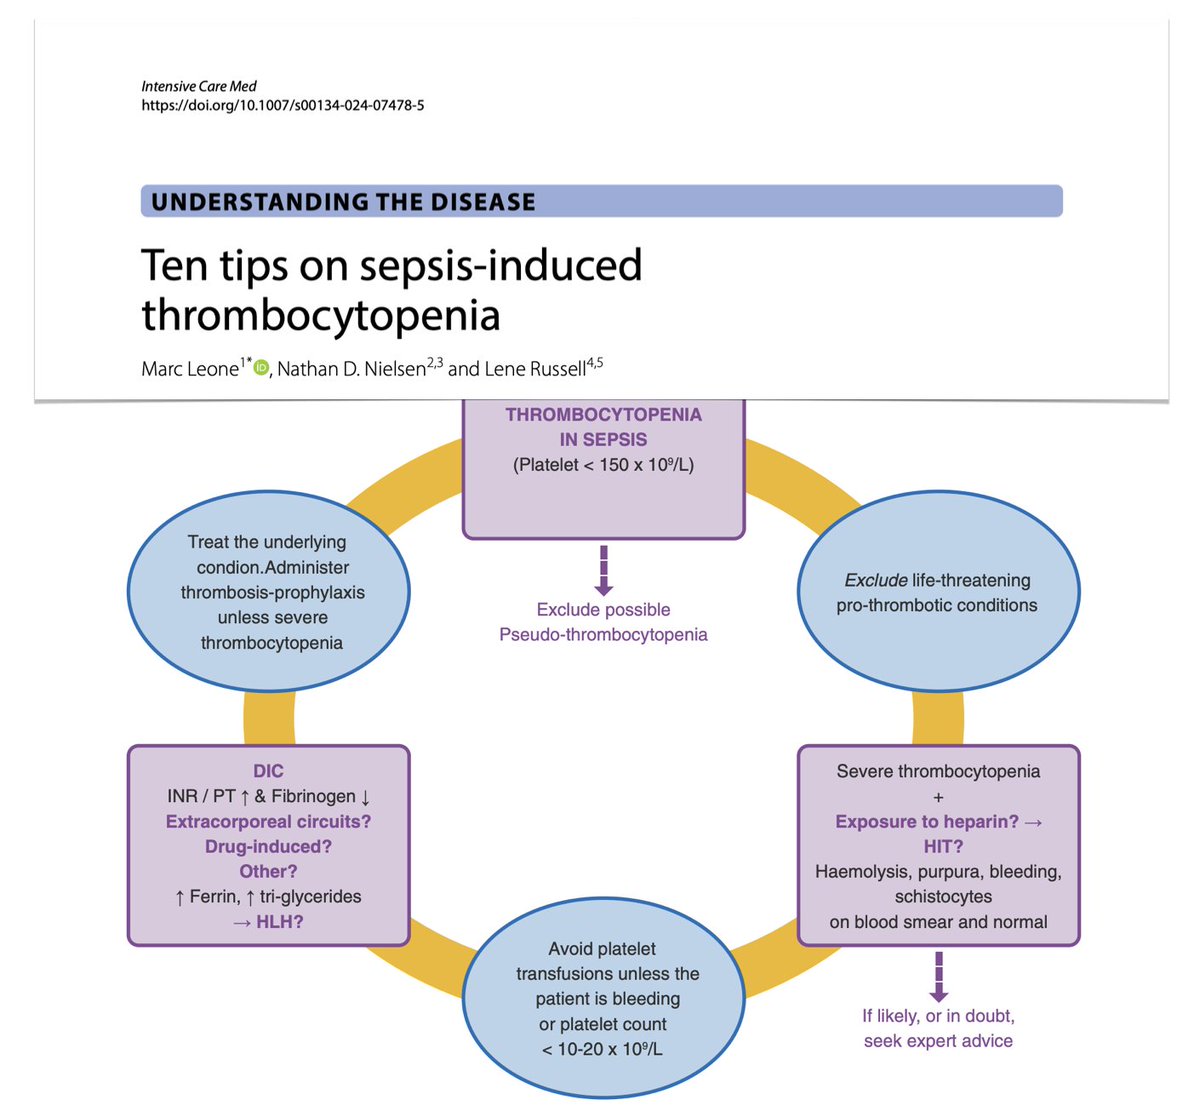 #Sepsis induced thrombocytopenia 1️⃣measuring PLT 2️⃣common/associated w outcome 3️⃣immune mechanisms 4️⃣vascular integrity & organ injury 5️⃣differential diagnoses 6️⃣ABTs 7️⃣DIC? not the same 8️⃣bleeding more vs PLTs count 9️⃣NOT exclude thrombosis 🔟transfuse? 🔓rdcu.be/dHZul